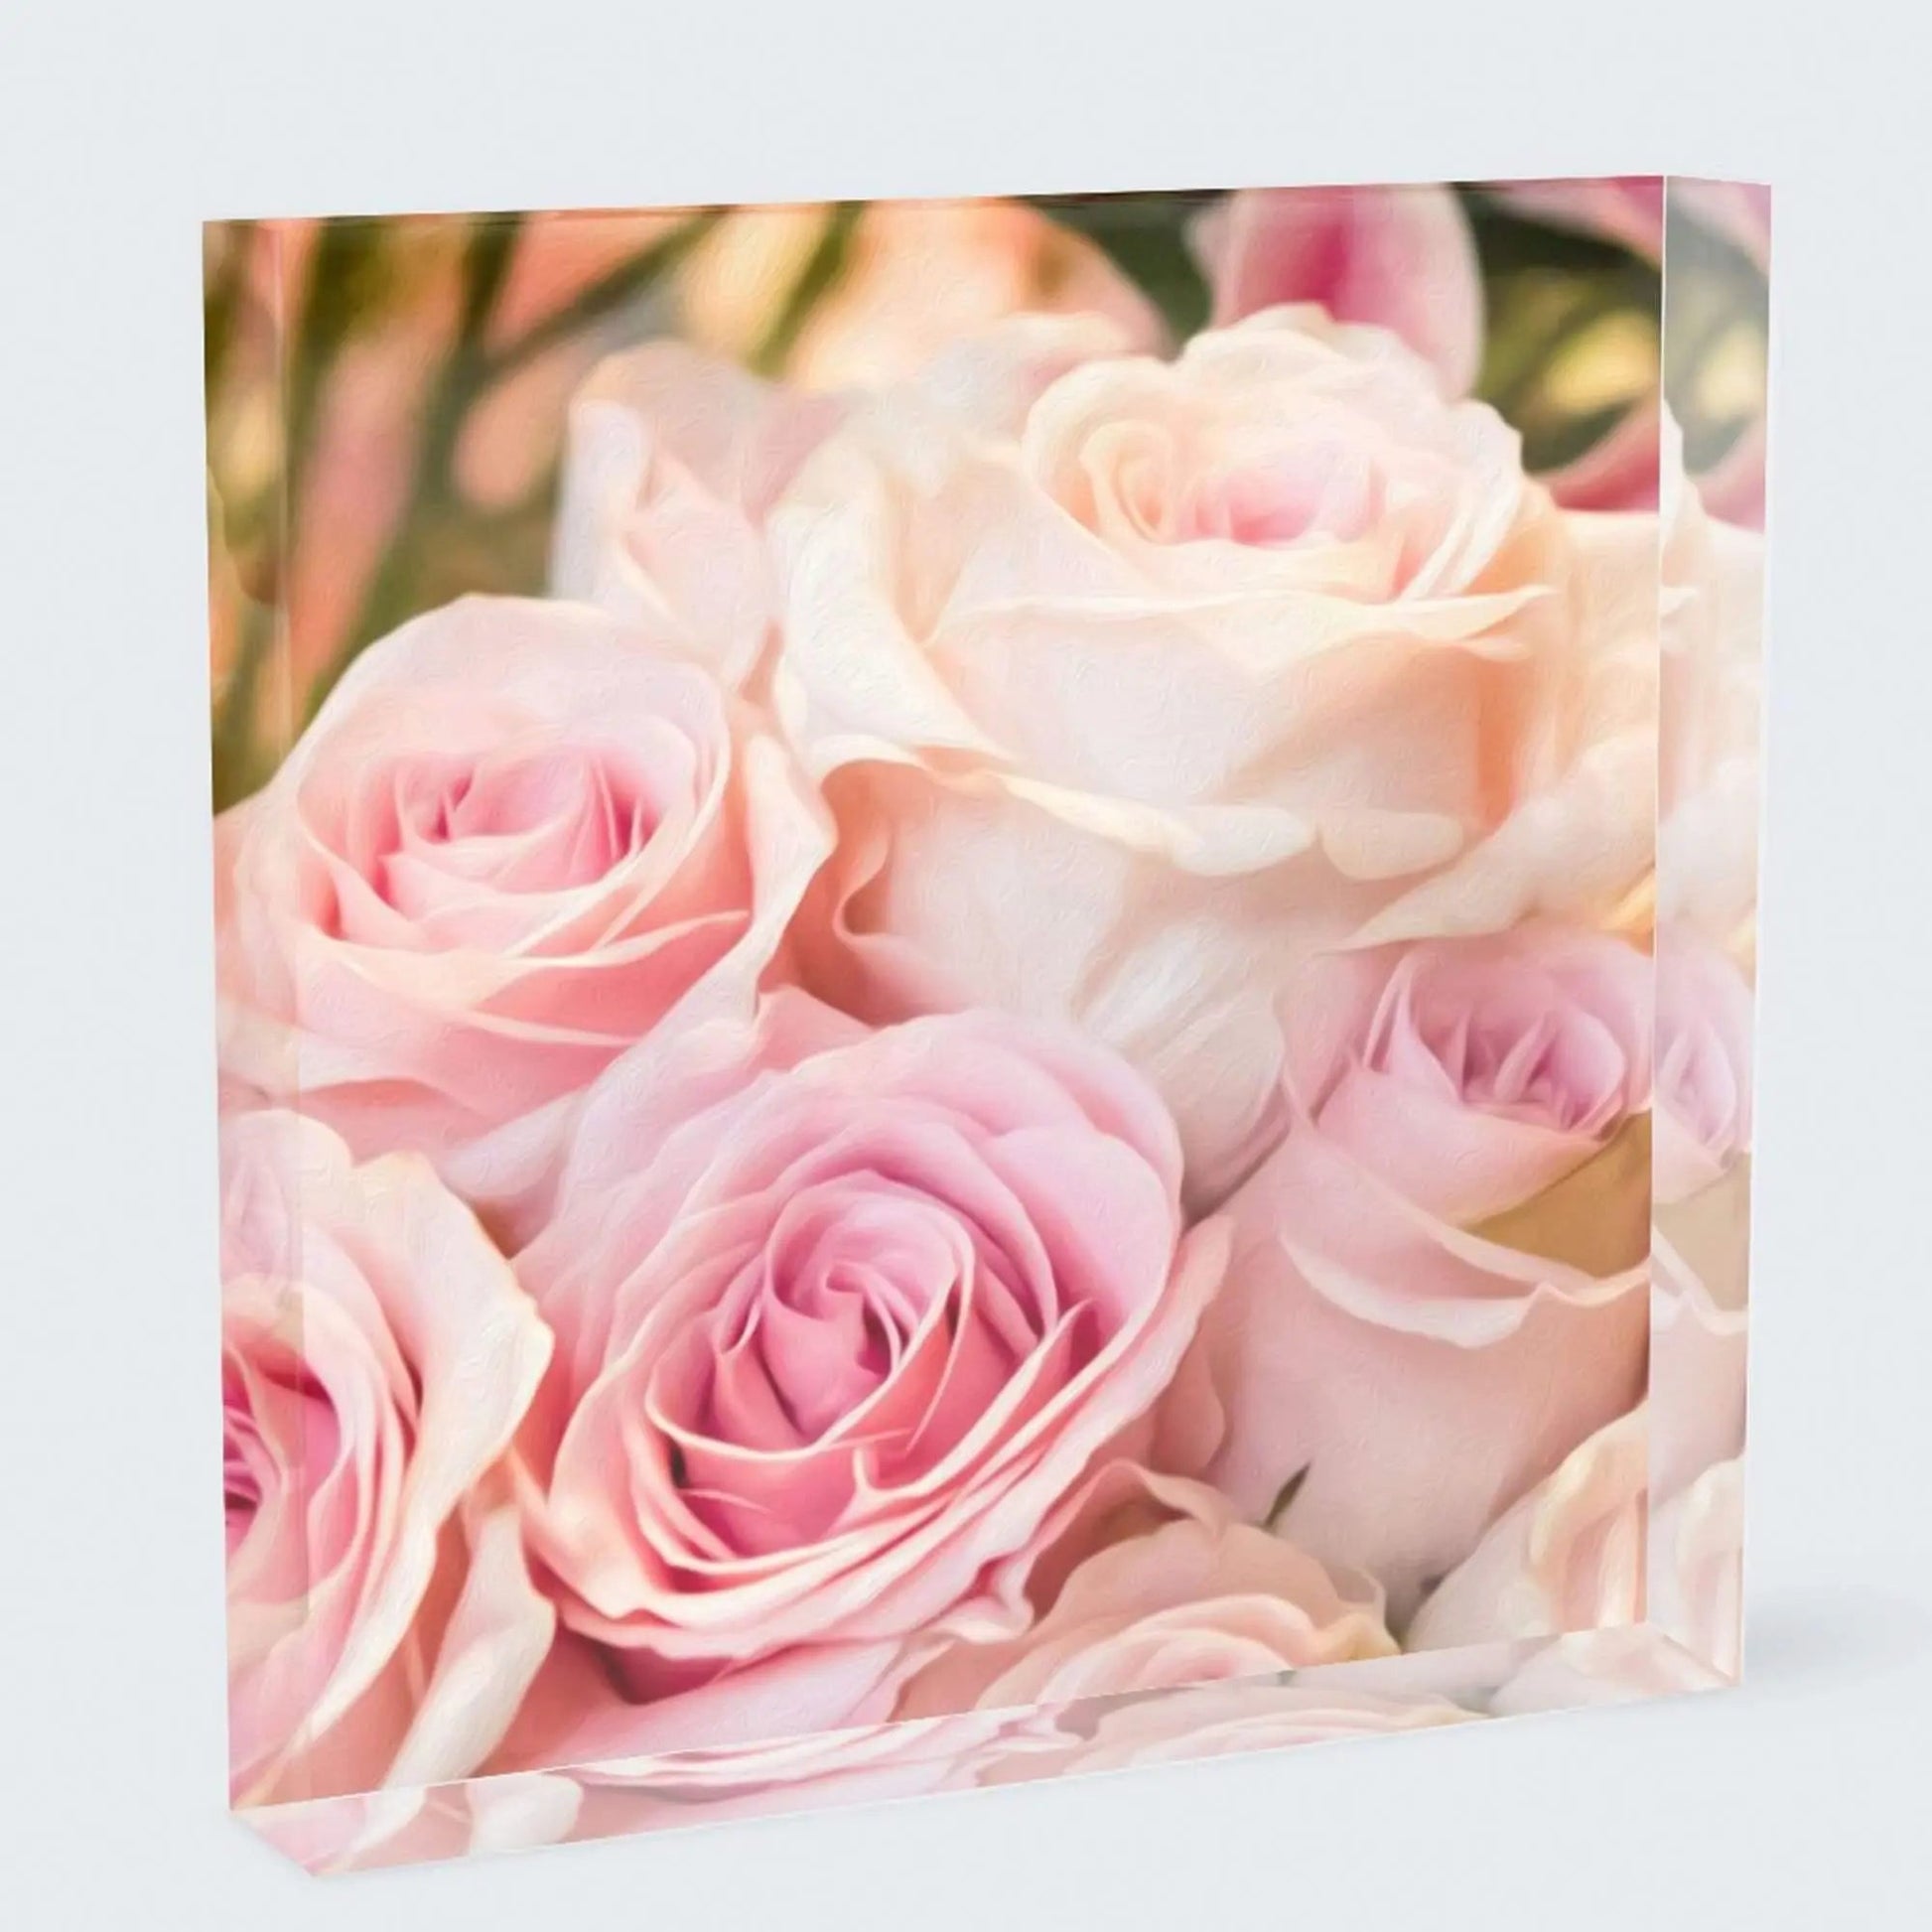 Sweet display for feminine shelf decor of light pink rose photo attached to a clear acrylic block